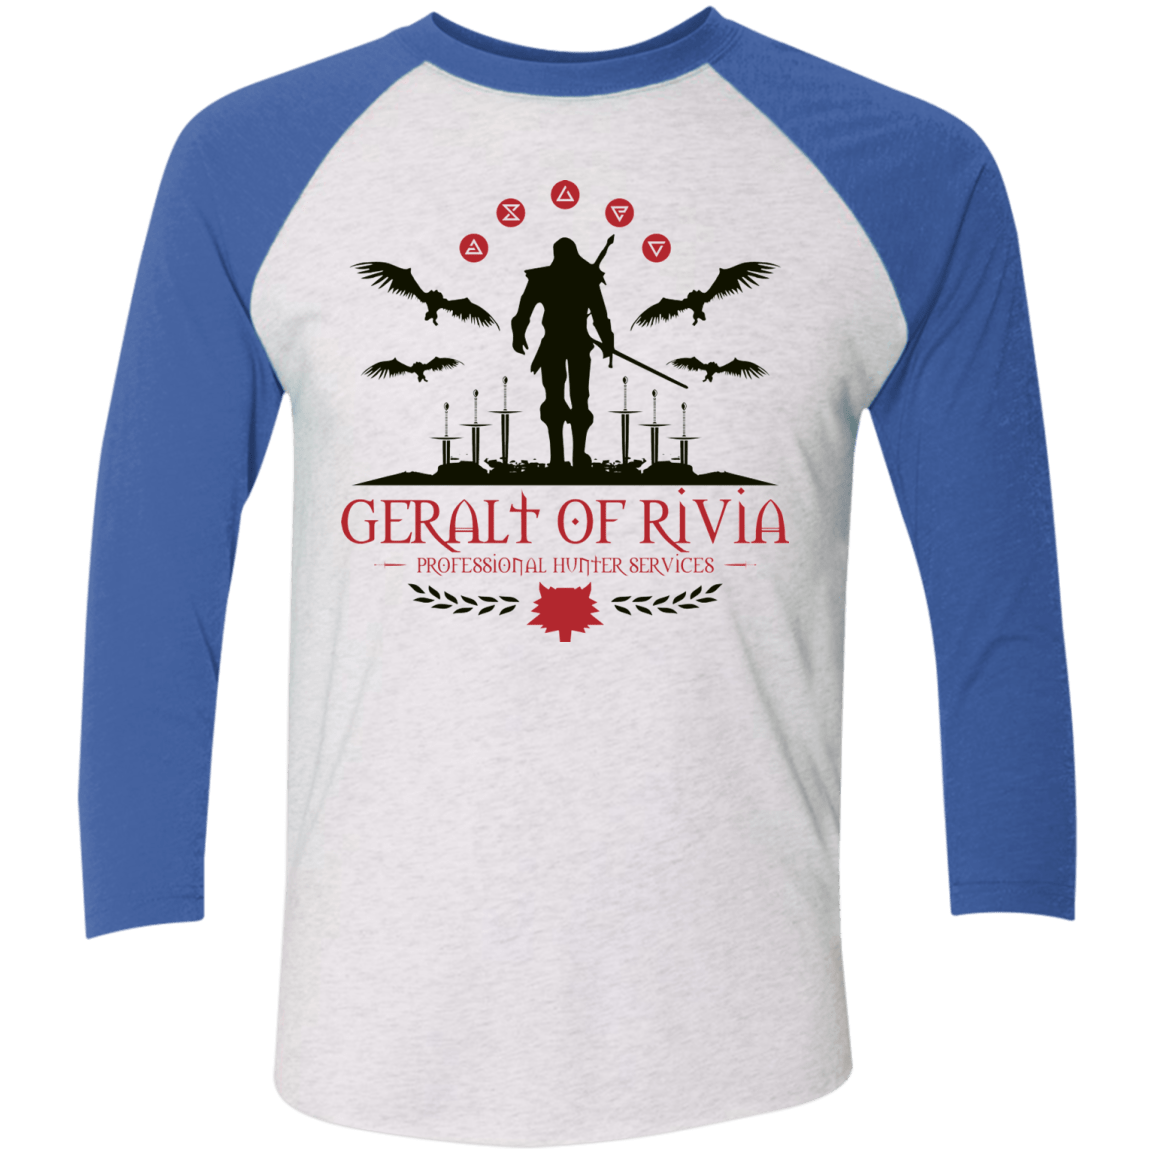 T-Shirts Heather White/Vintage Royal / X-Small The Witcher 3 Wild Hunt Men's Triblend 3/4 Sleeve